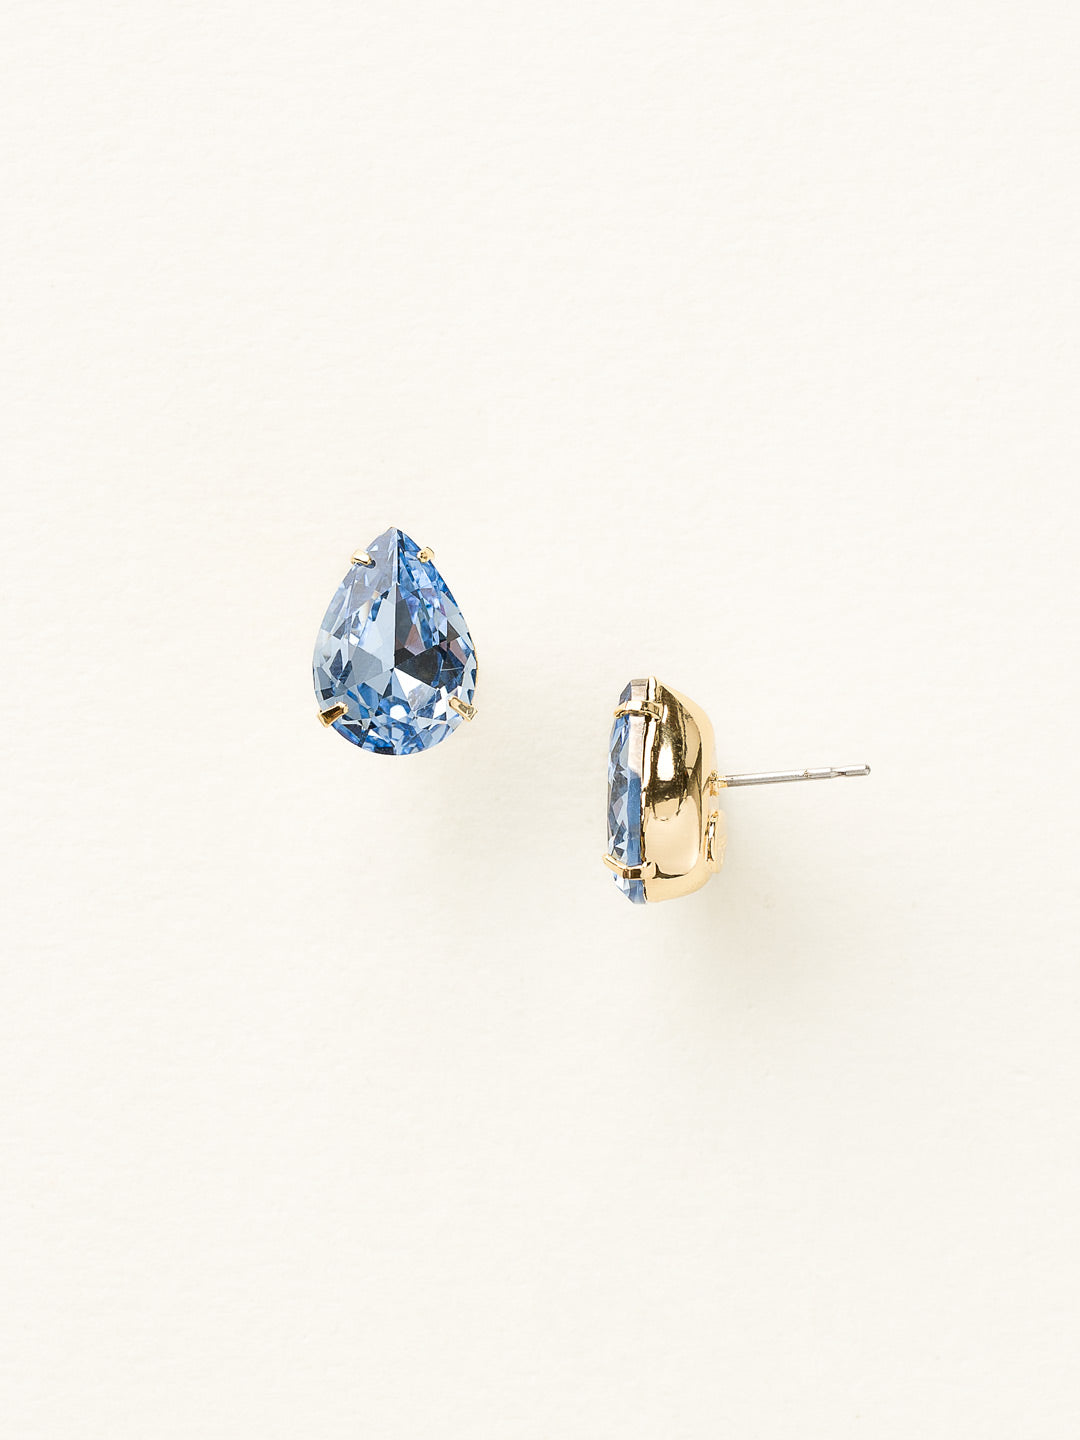 Ginnie Stud Earrings - ECR115BGSS - <p>A beautiful basic stud. These classic single teardrop post earrings are perfect for any occasion, especially the everyday look. A timeless treasure that will sparkle season after season. From Sorrelli's Sweet Sapphire collection in our Bright Gold-tone finish.</p>